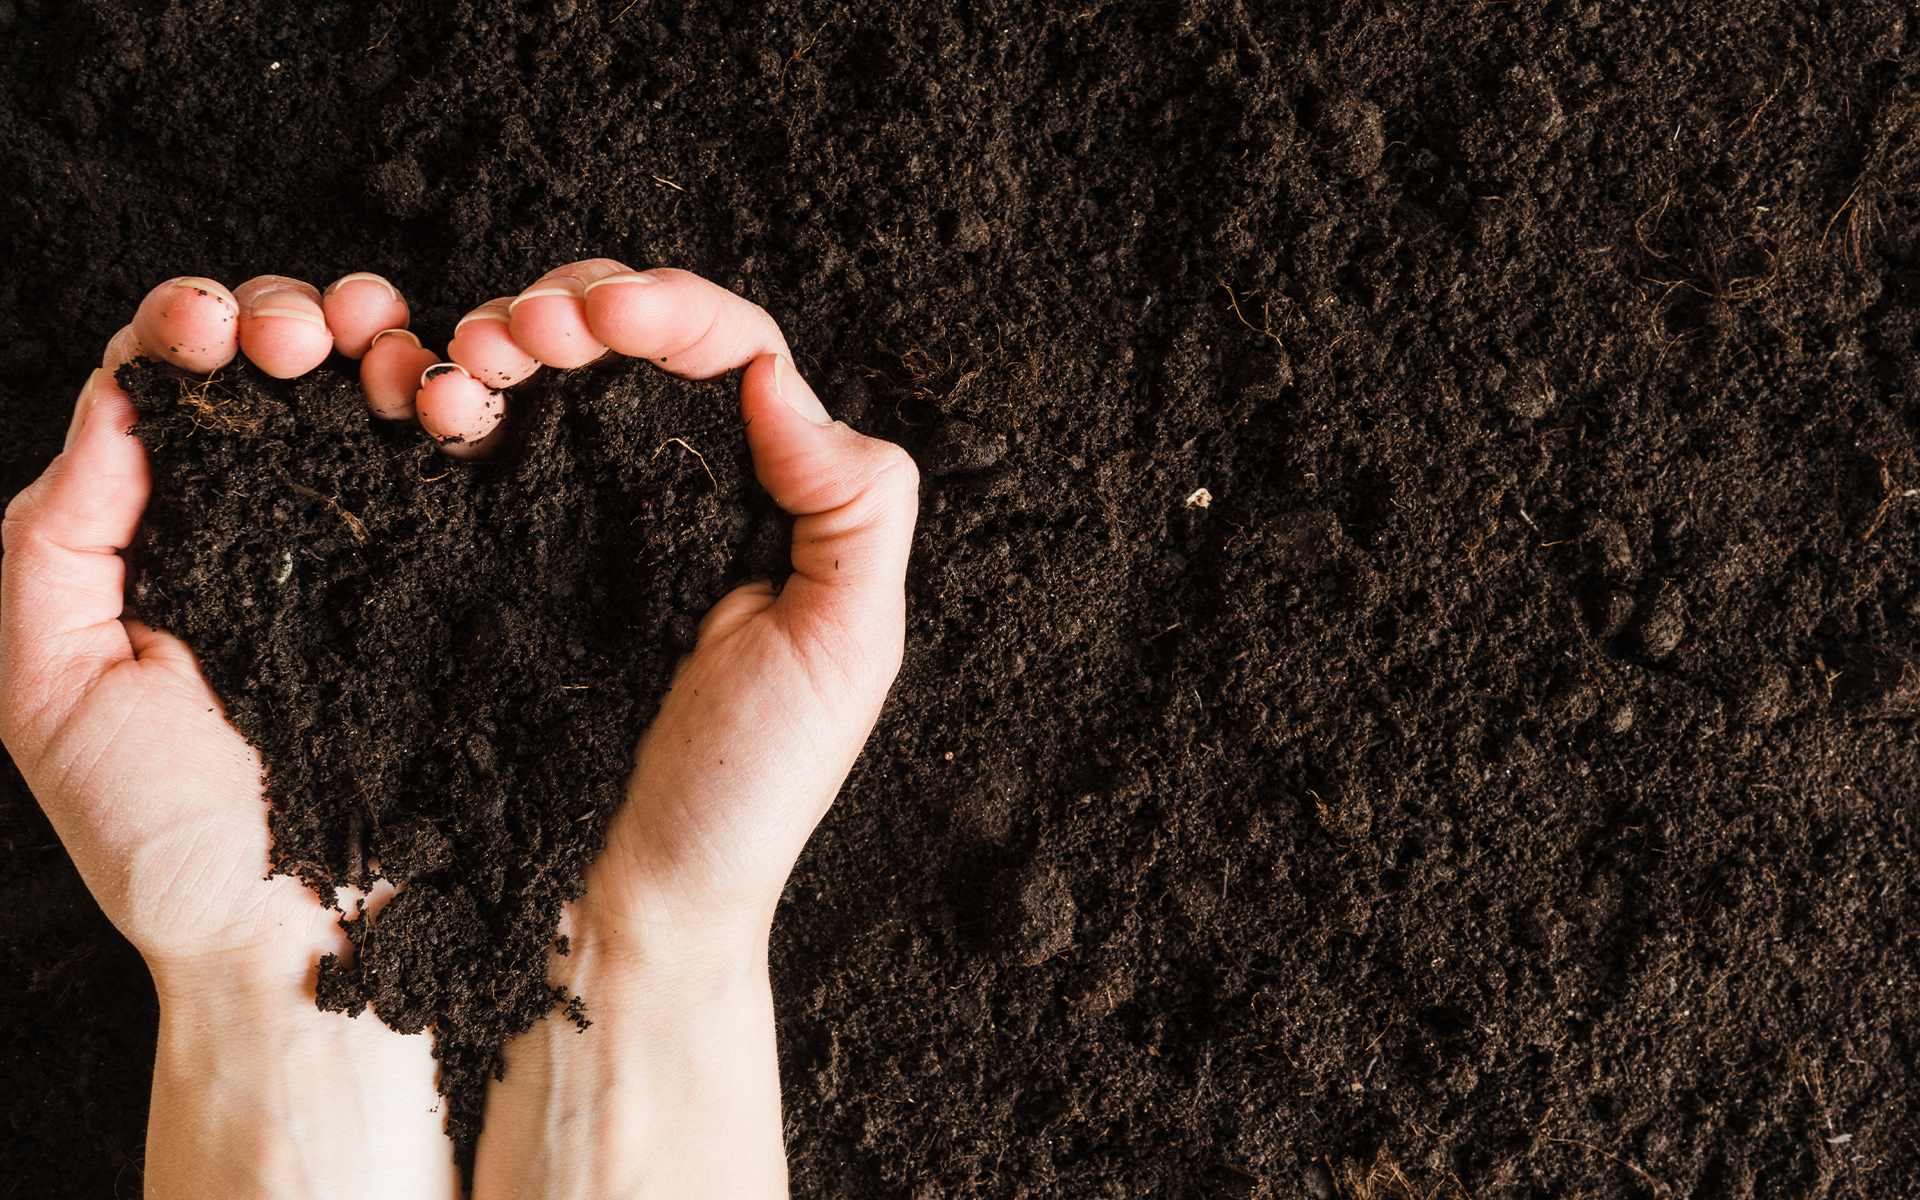 How To Make A Good Soil For Planting